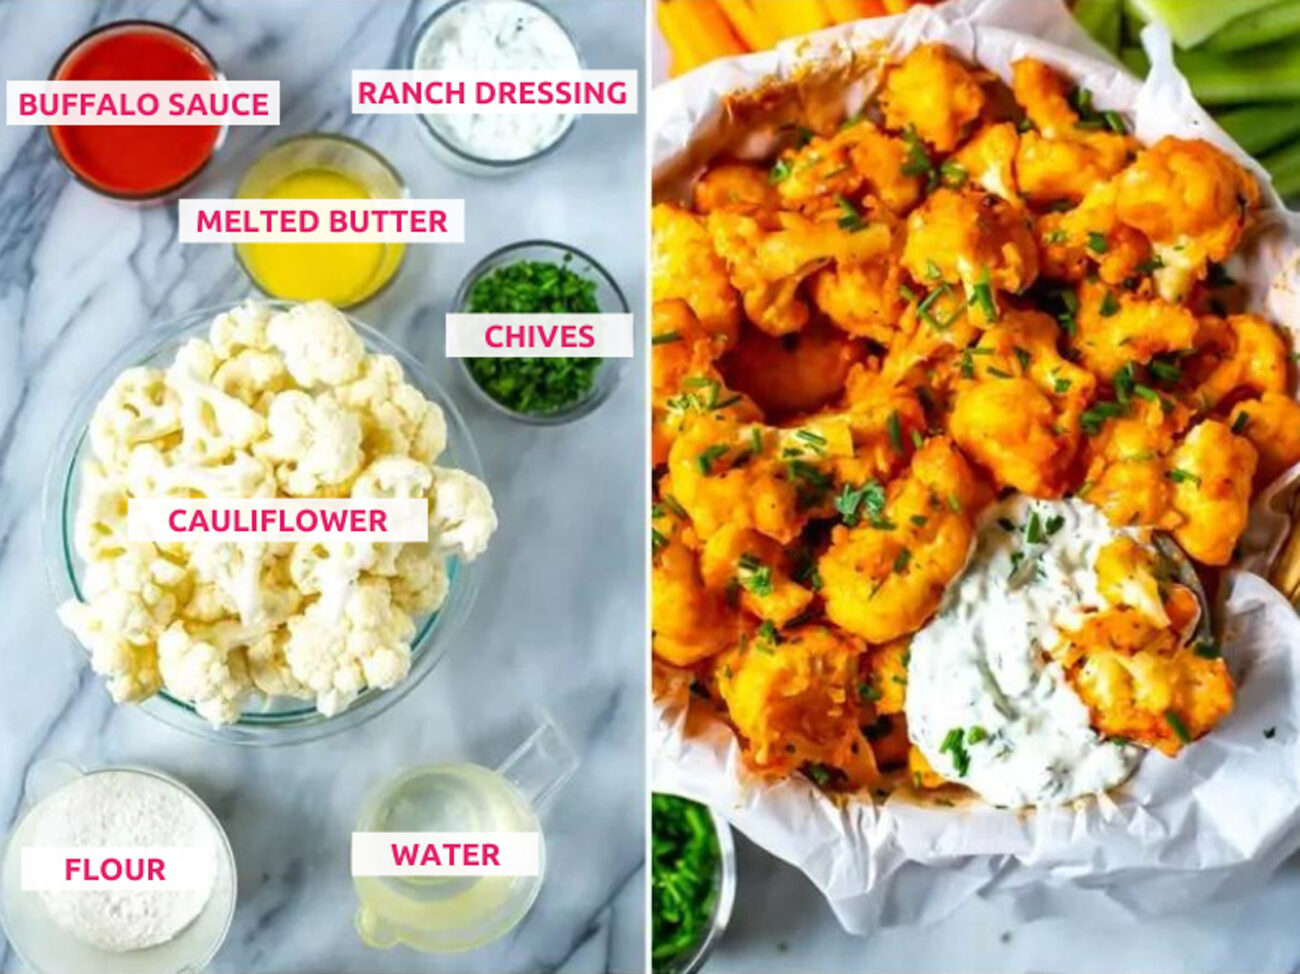 Ingredients for buffalo cauliflower: cauliflower, flour, melted butter, buffalo sauce, ranch dressing and chives.